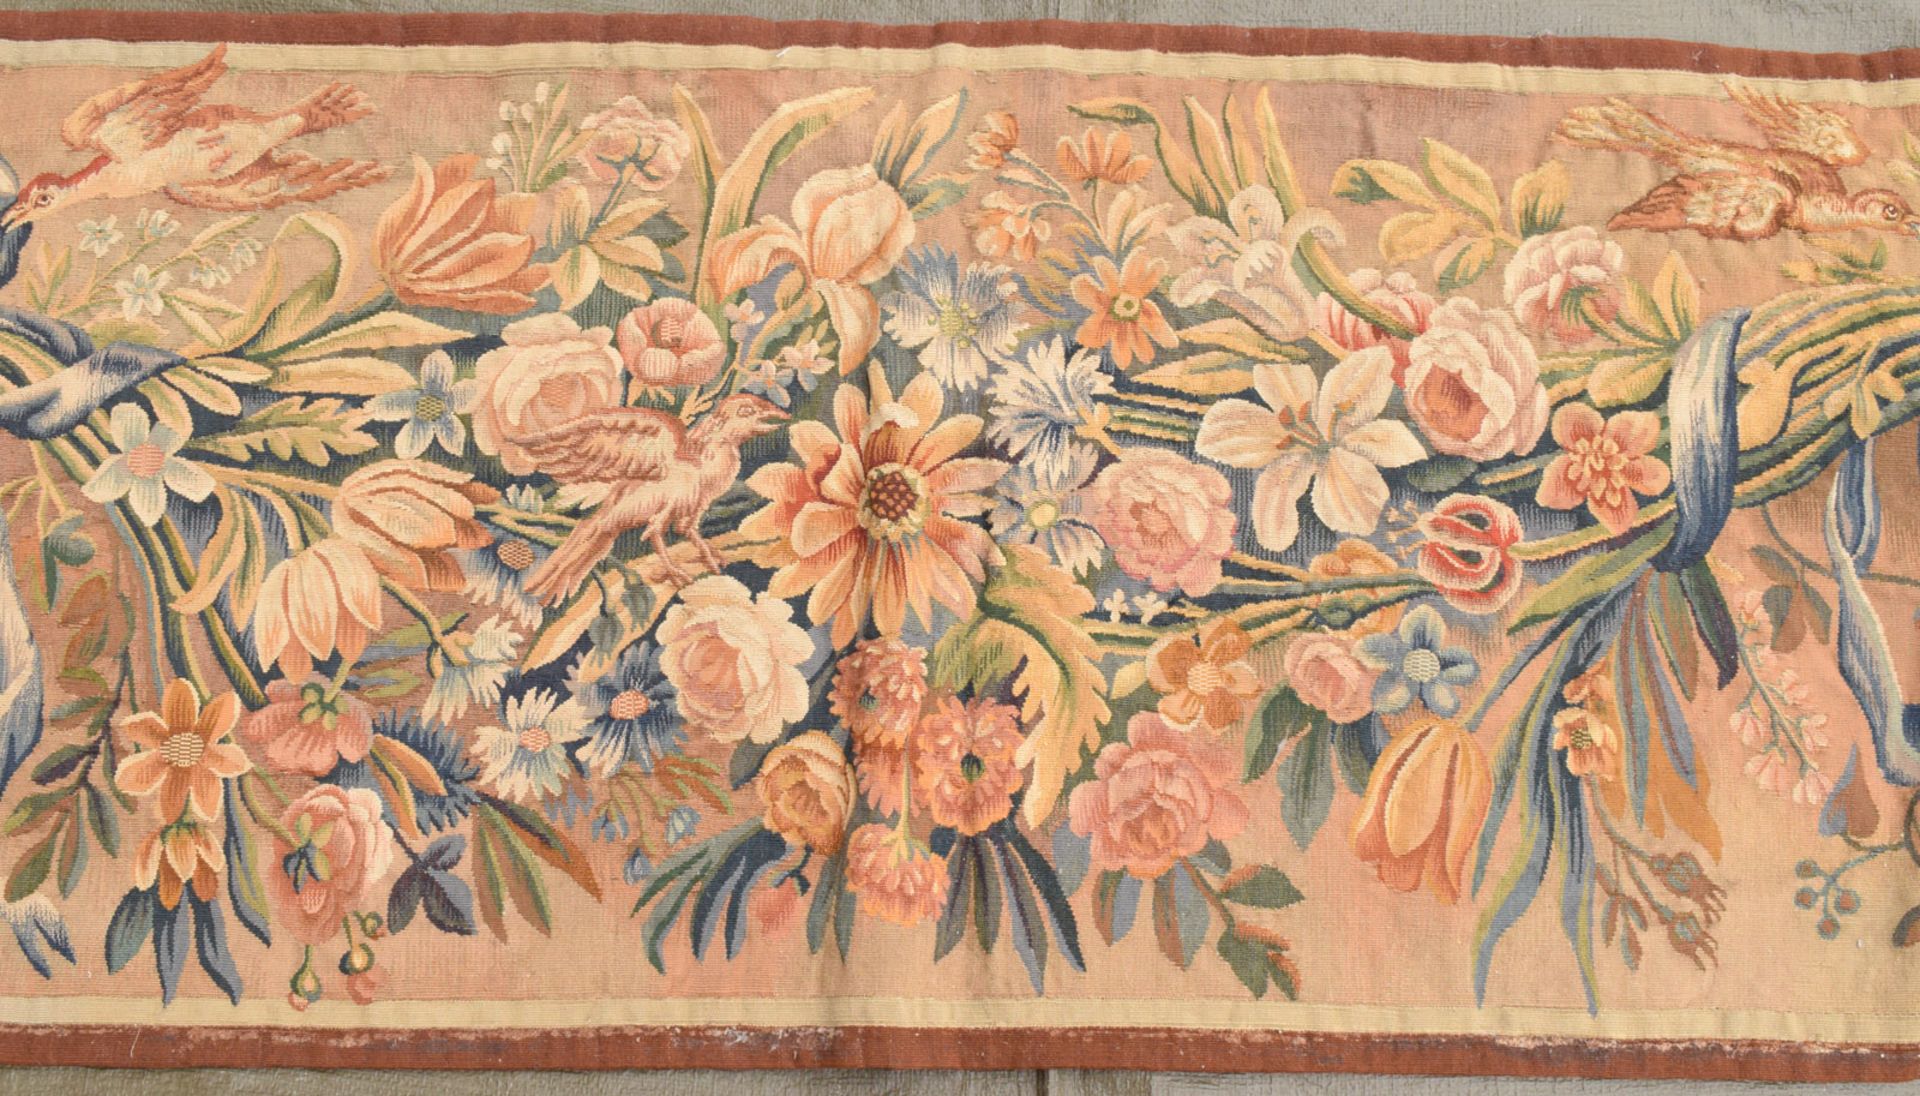 A TAPESTRY BORDER FRAGMENT USED AS A DOOR FRAME DECORATION - Image 6 of 10